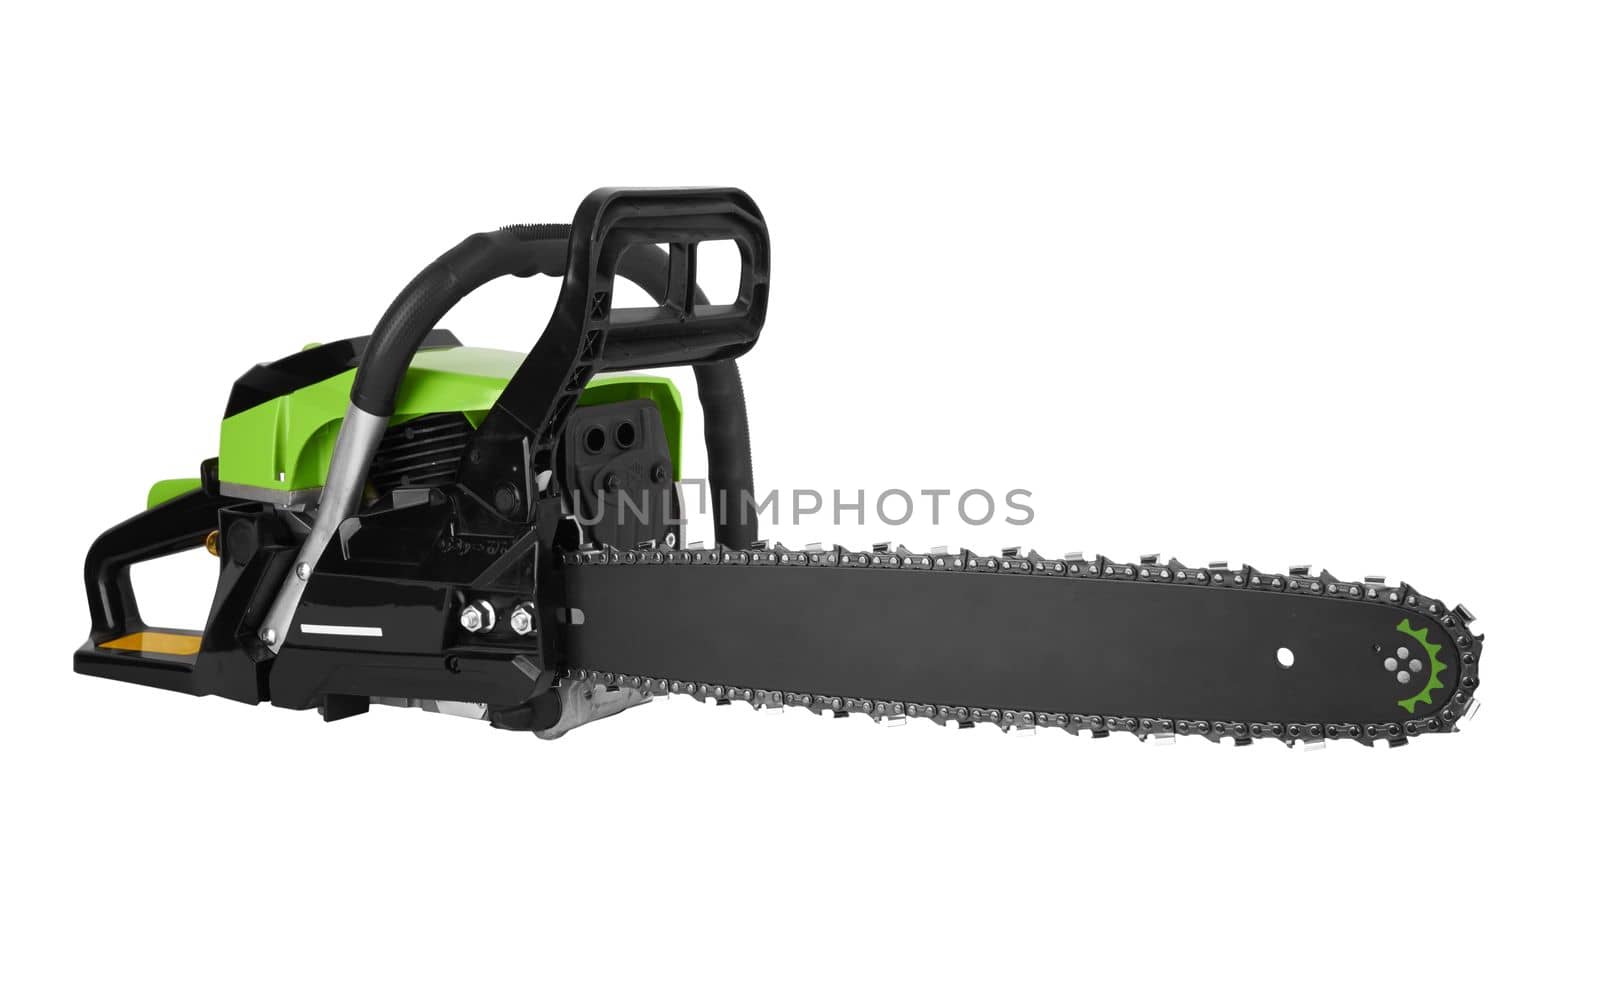 Chainsaw on white by pioneer111